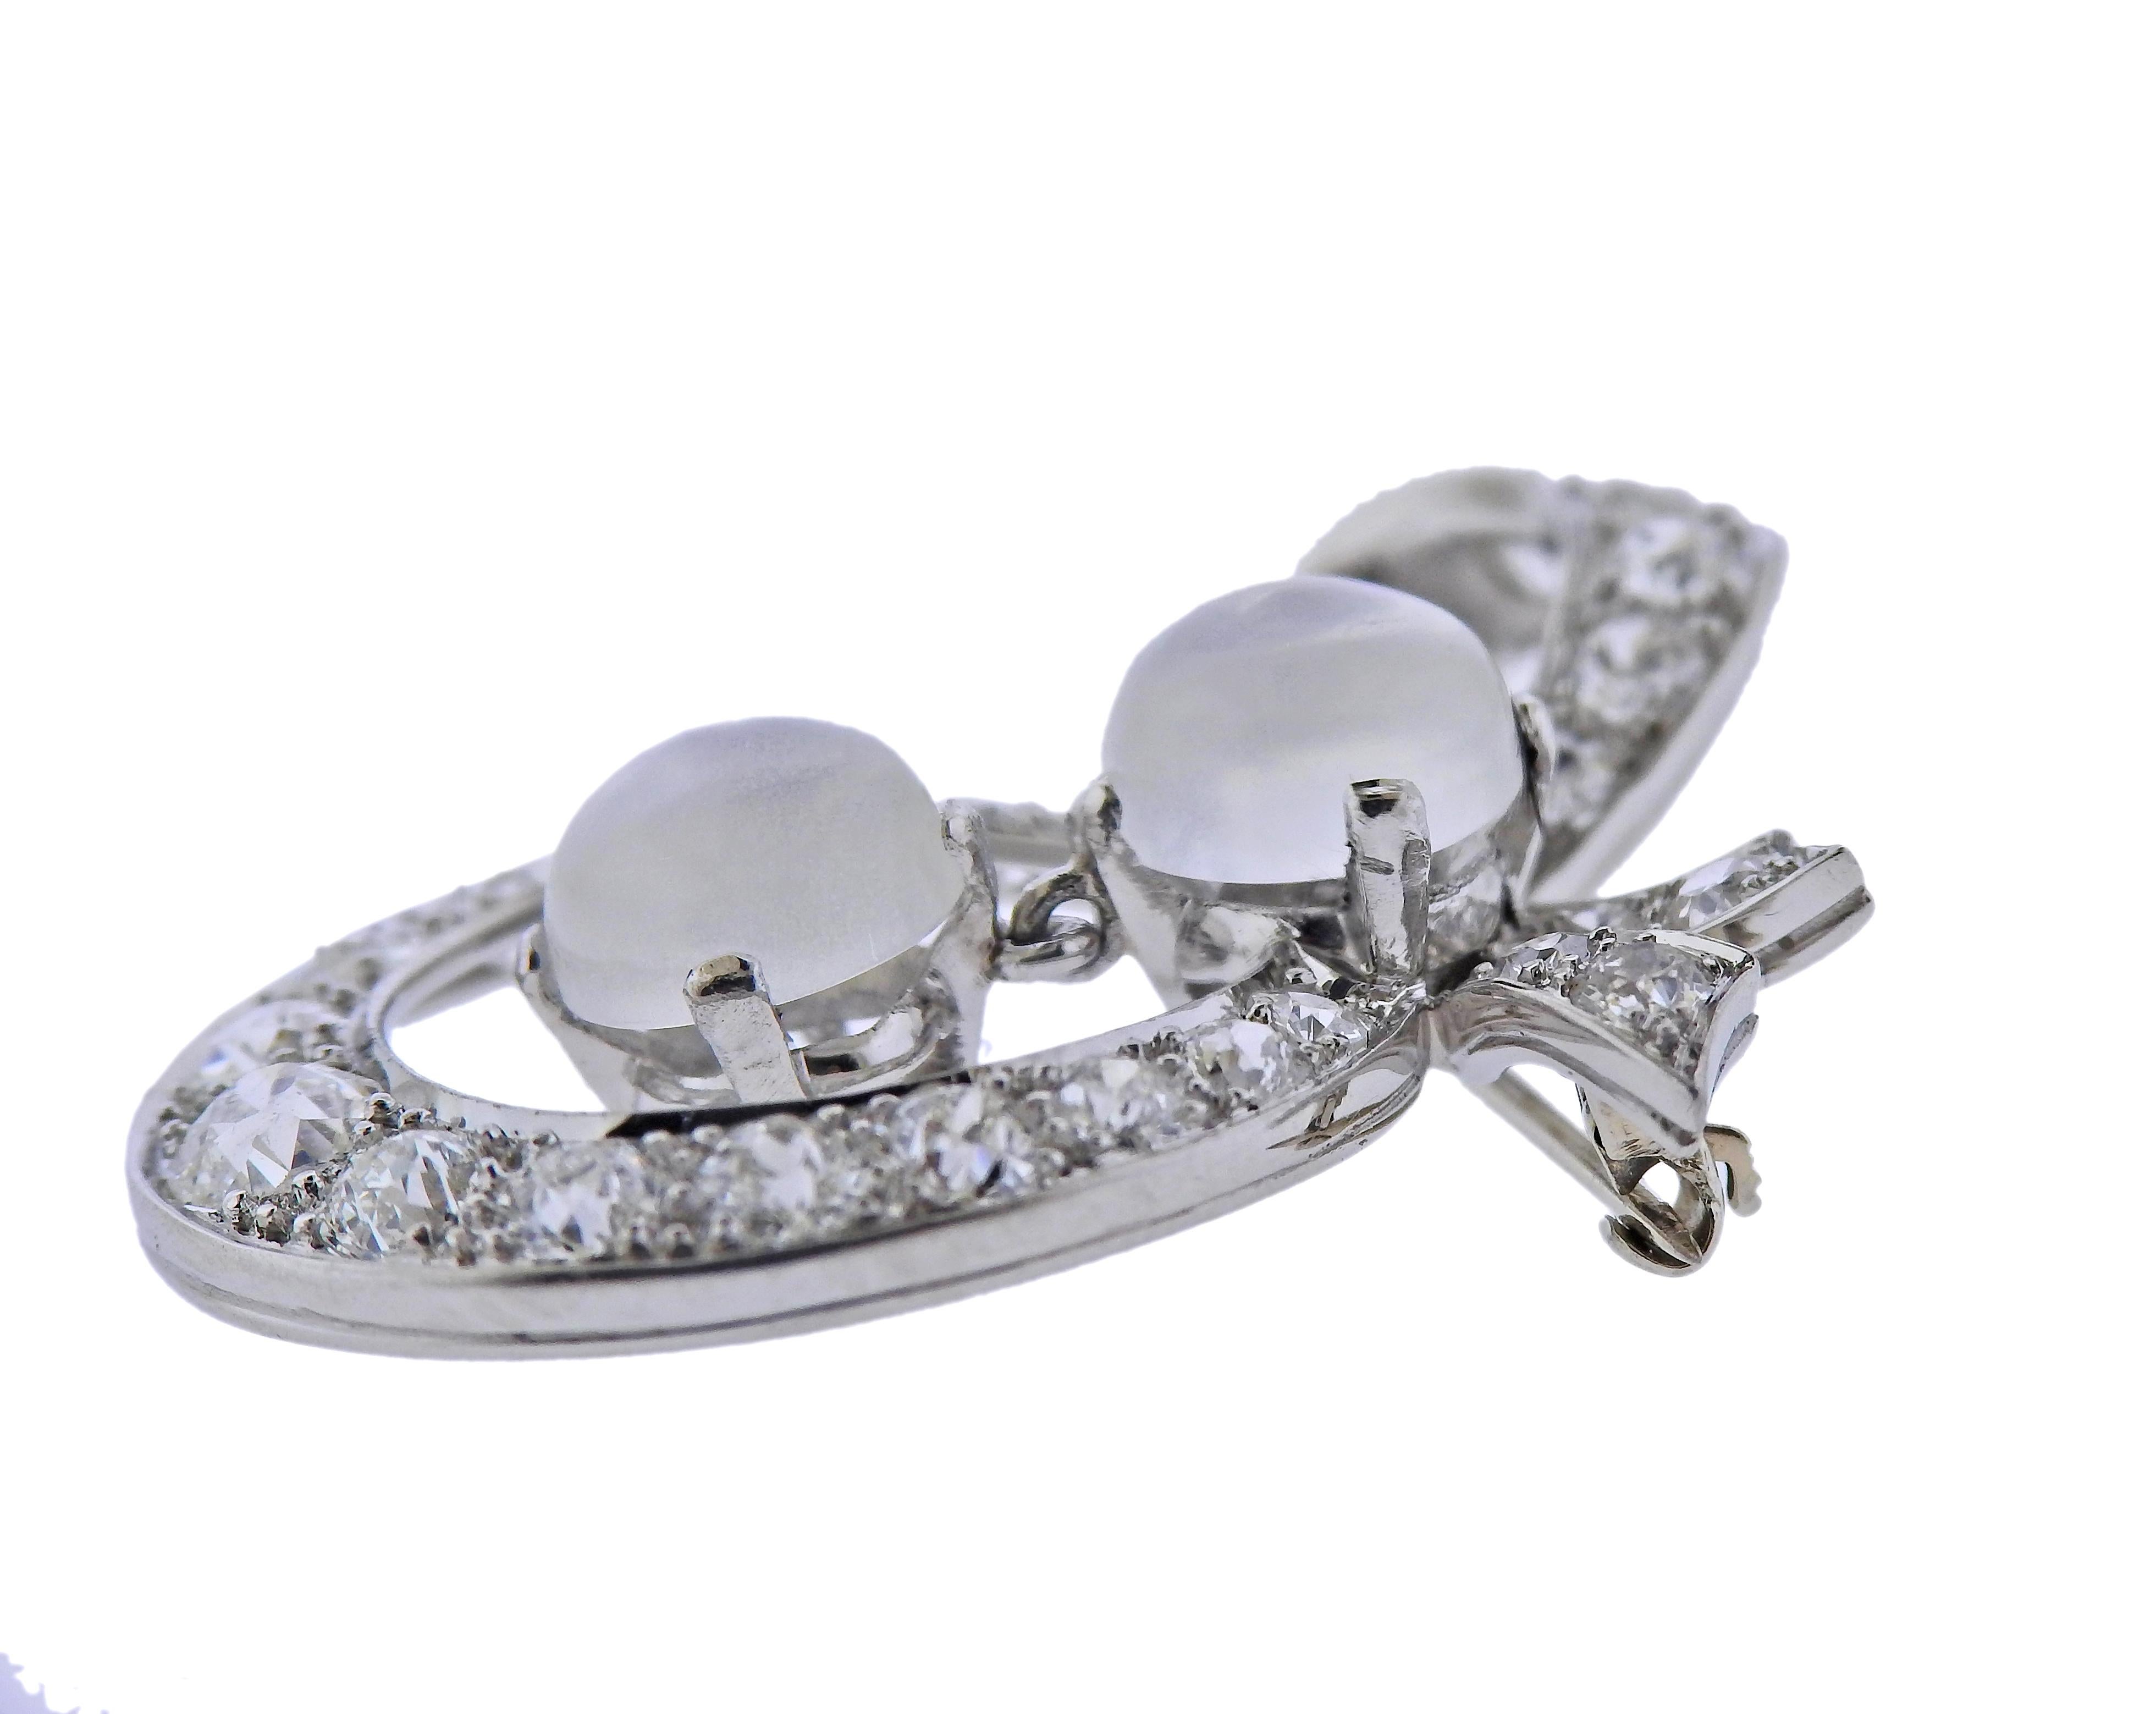 14k gold bow brooch set with two 7mm moonstones, and approx. 1.60ctw in diamonds. Brooch measures 32mm x 21mm. Marked 14k. Weight - 7.6 grams.